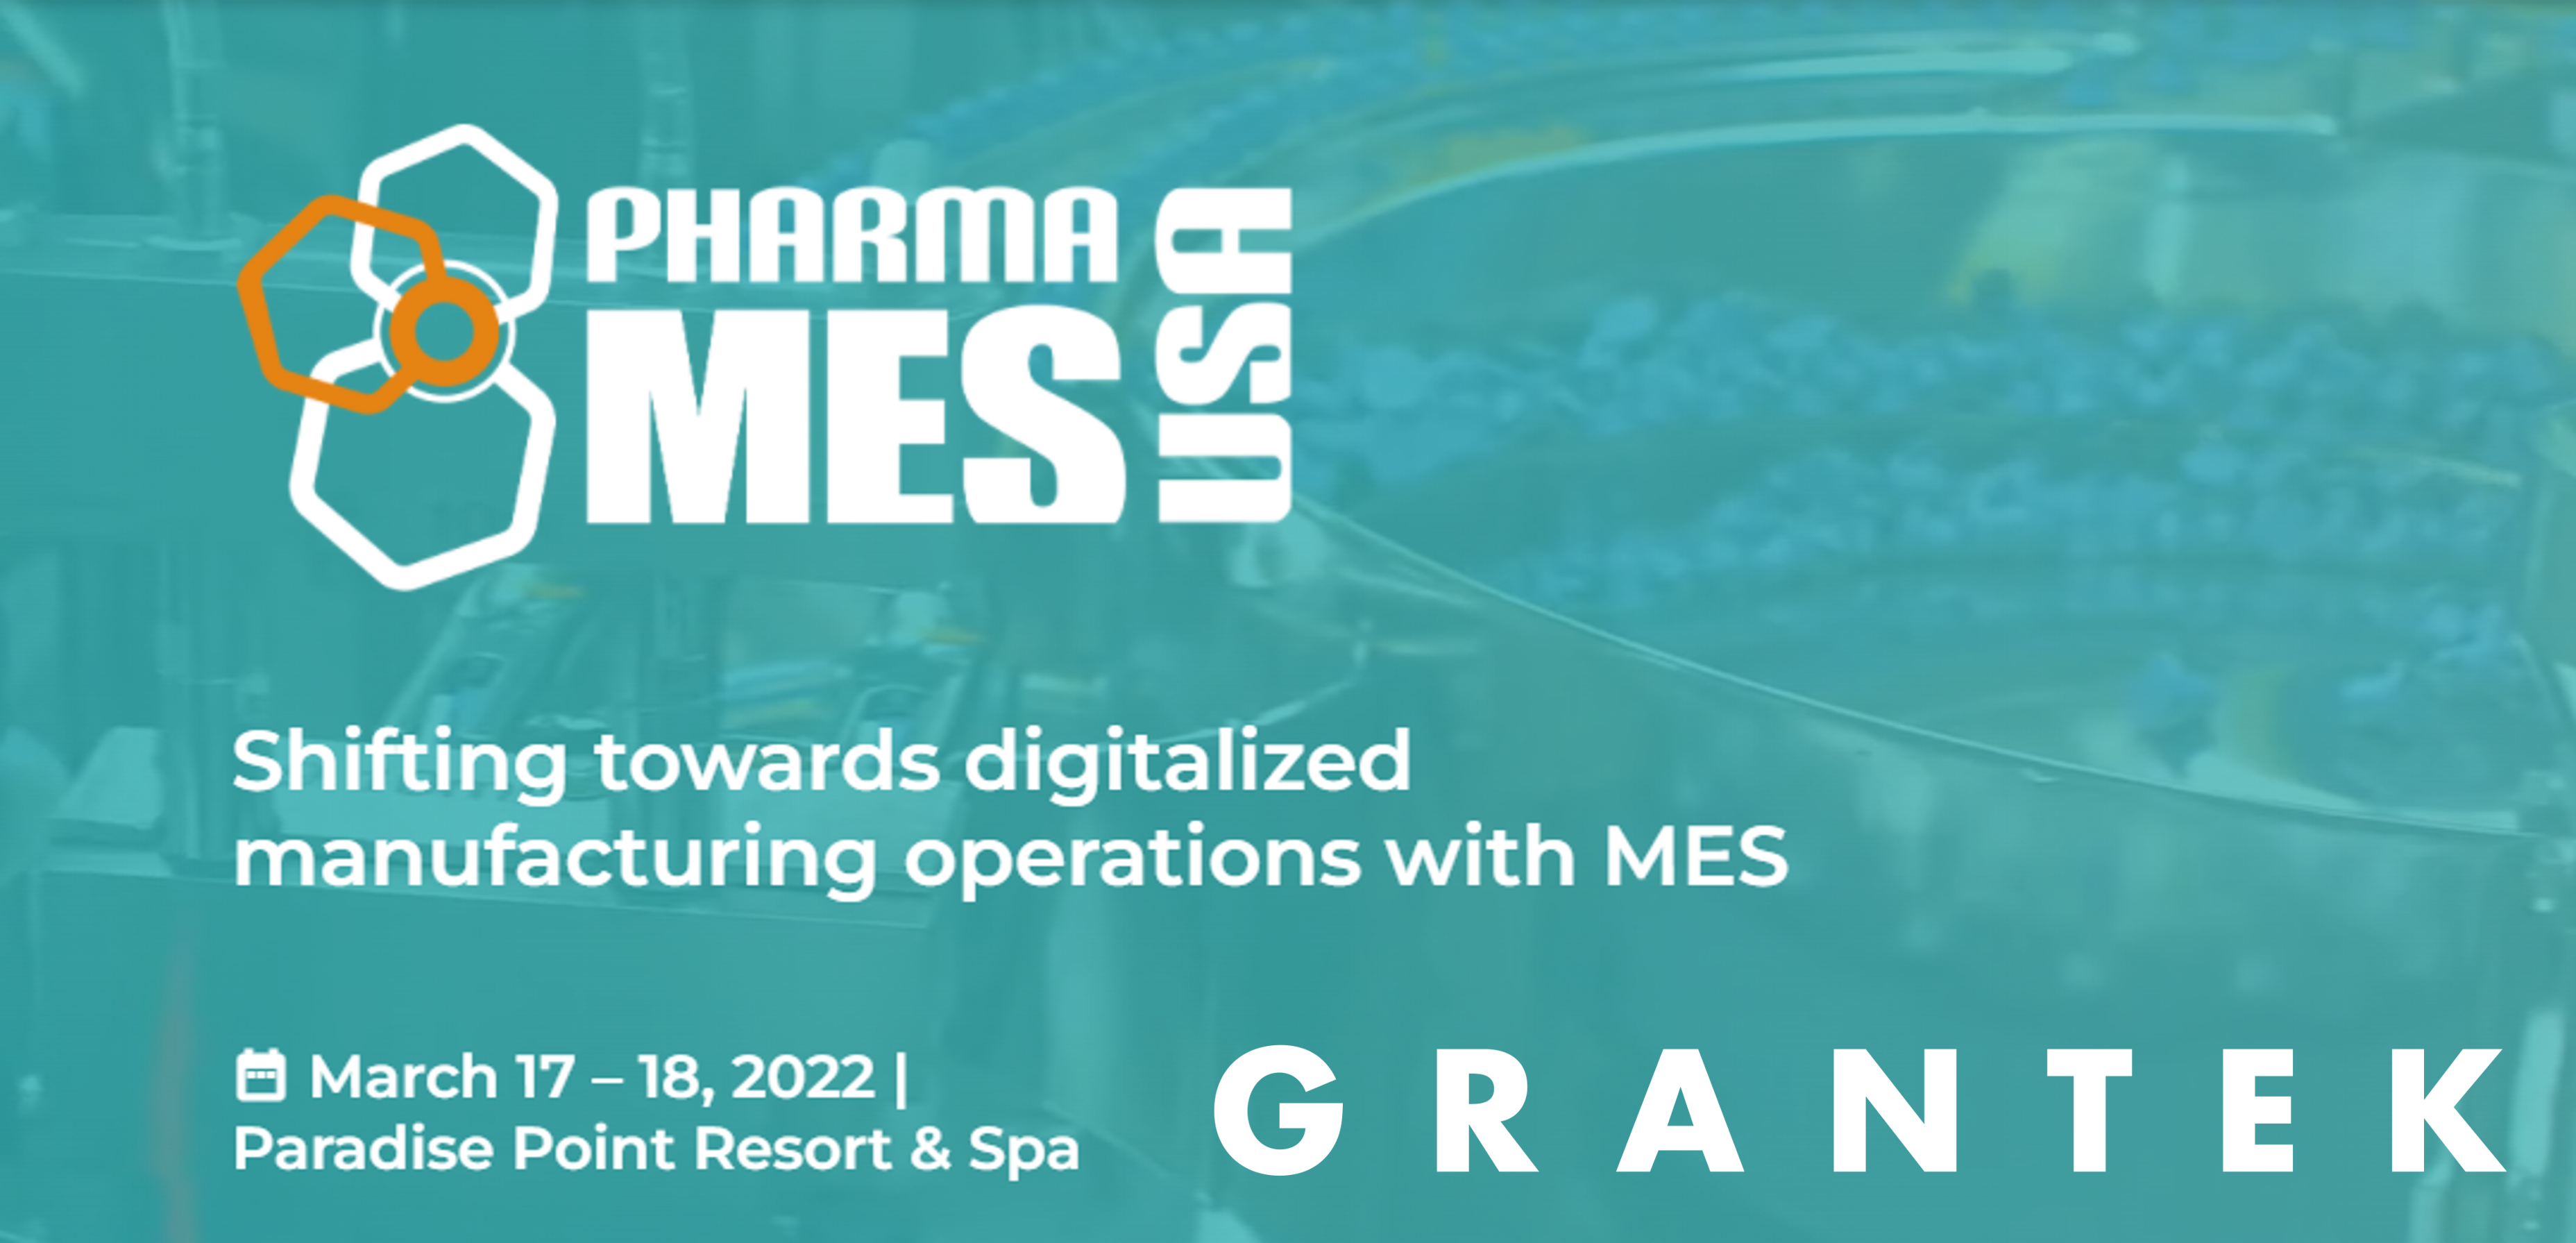 Grantek to Exhibit at the 2022 Pharma MES USA Show in San Diego, CA